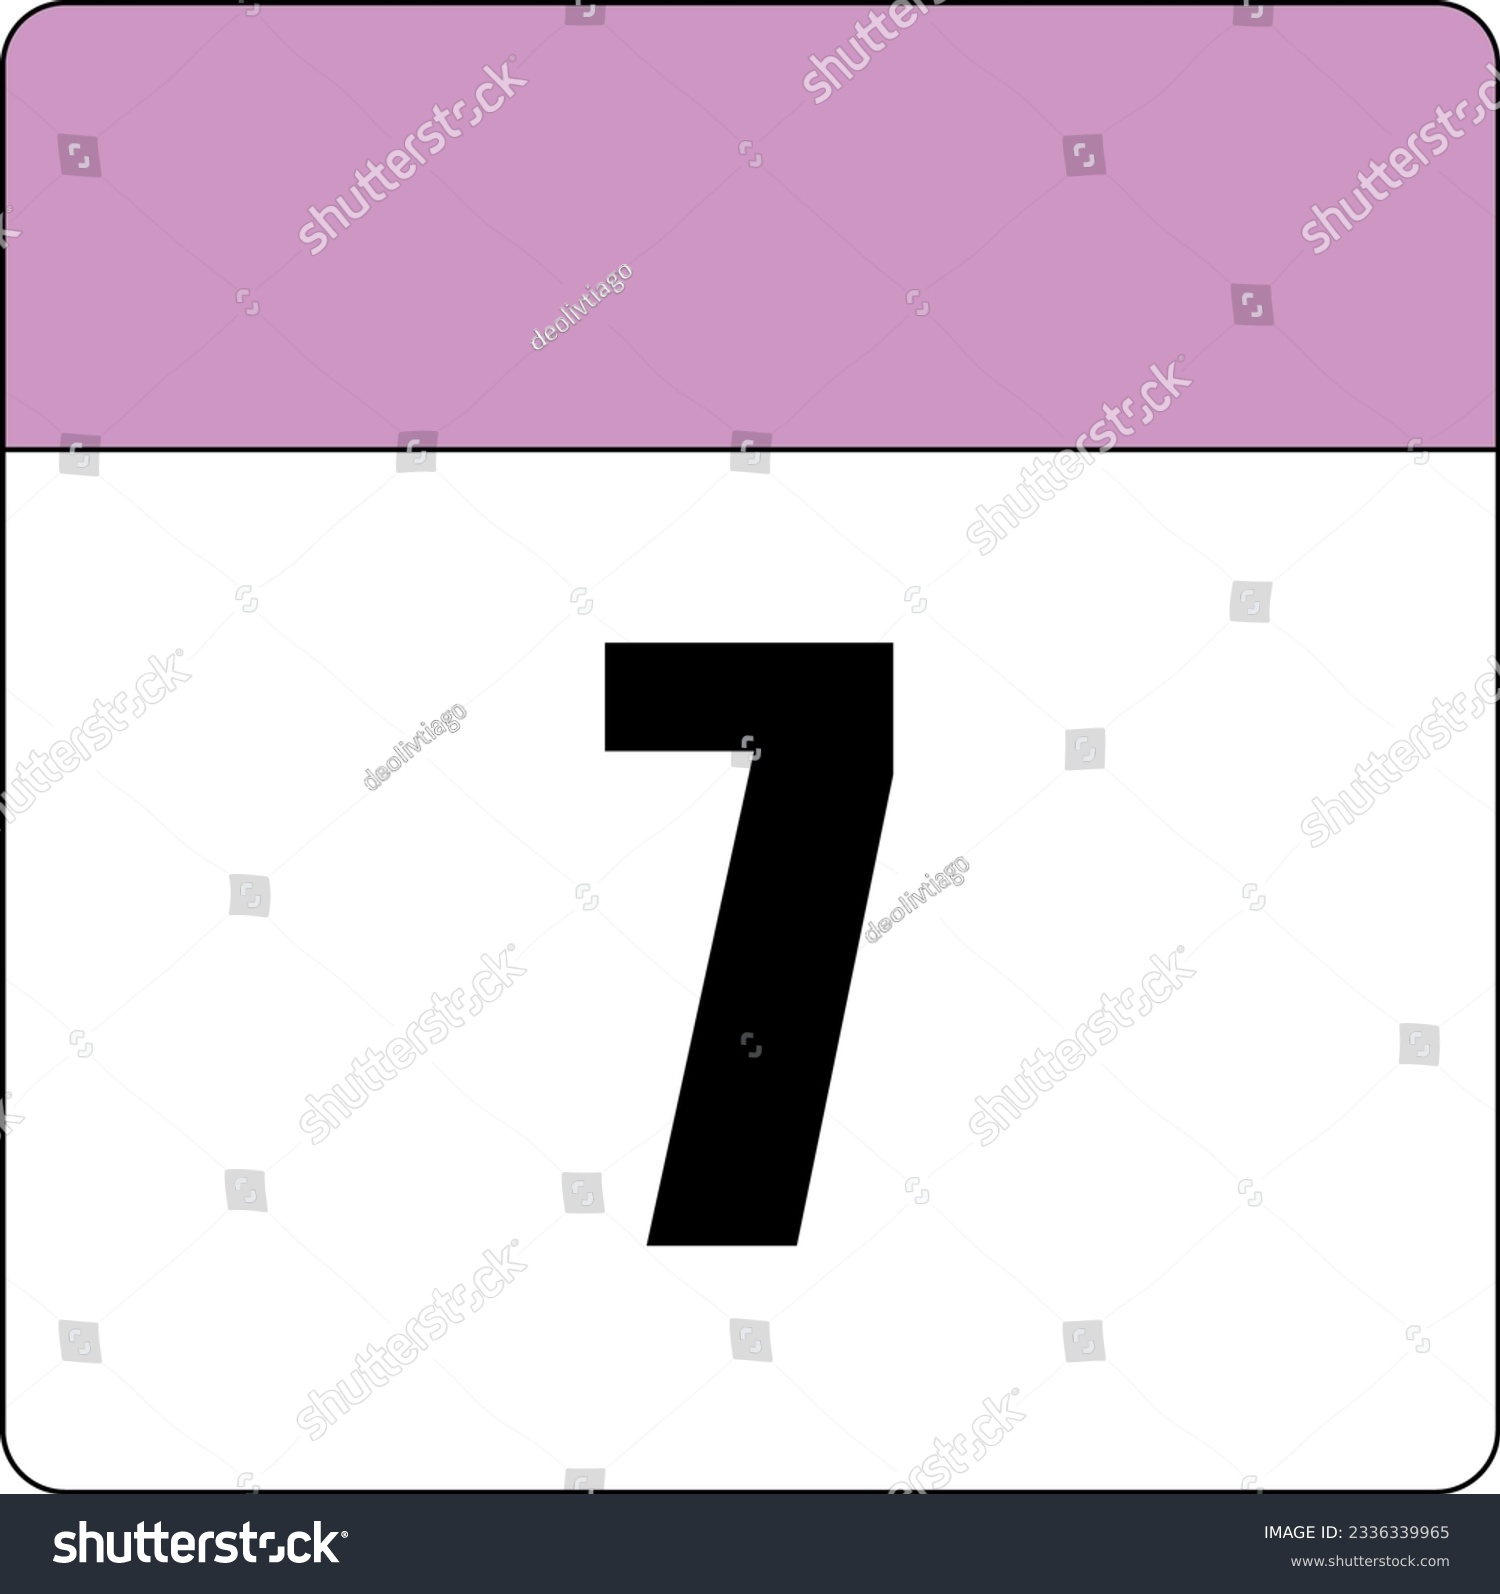 SVG of simple calendar icon with pink header and white background showing 7th day number seven svg